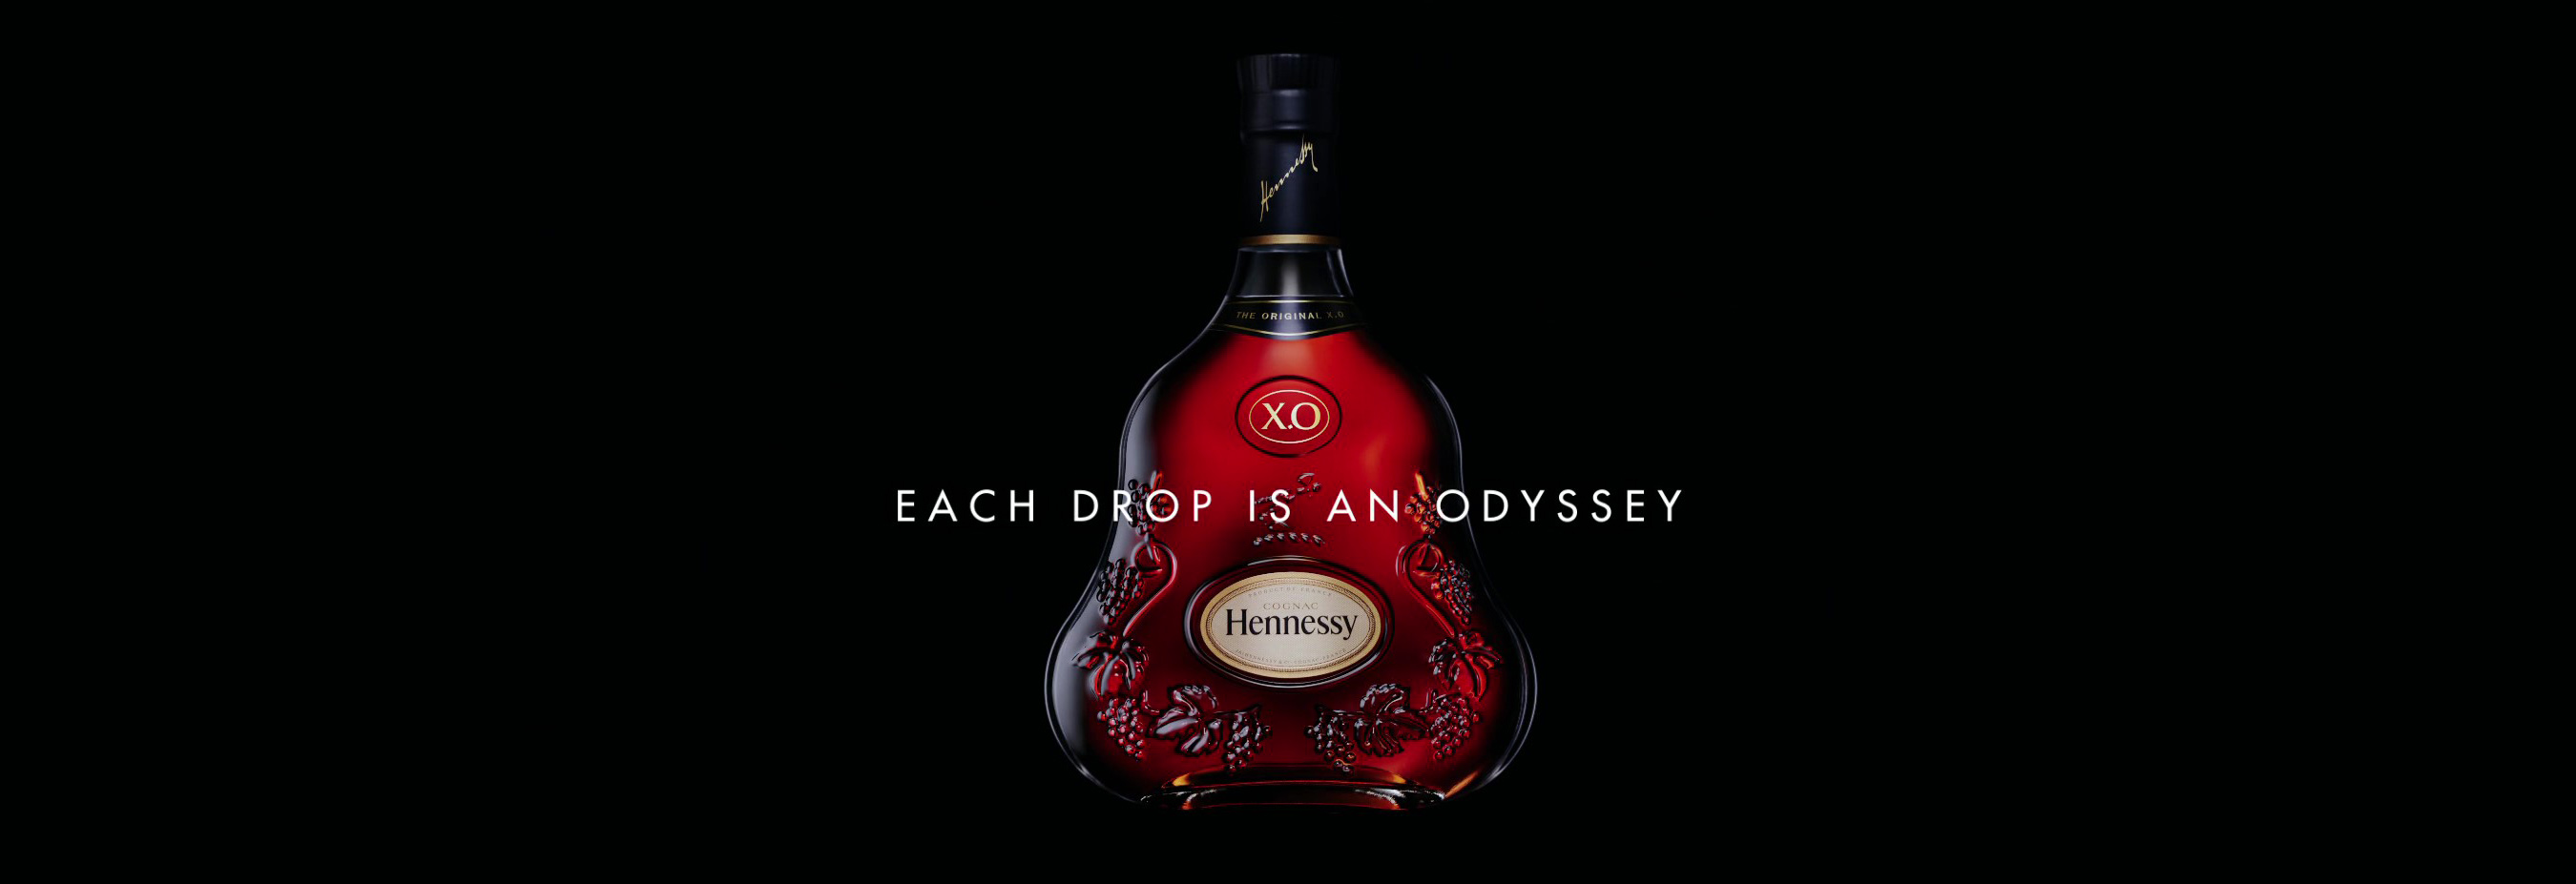 Behind the scenes of the Hennessy XO cognac - Hennessy